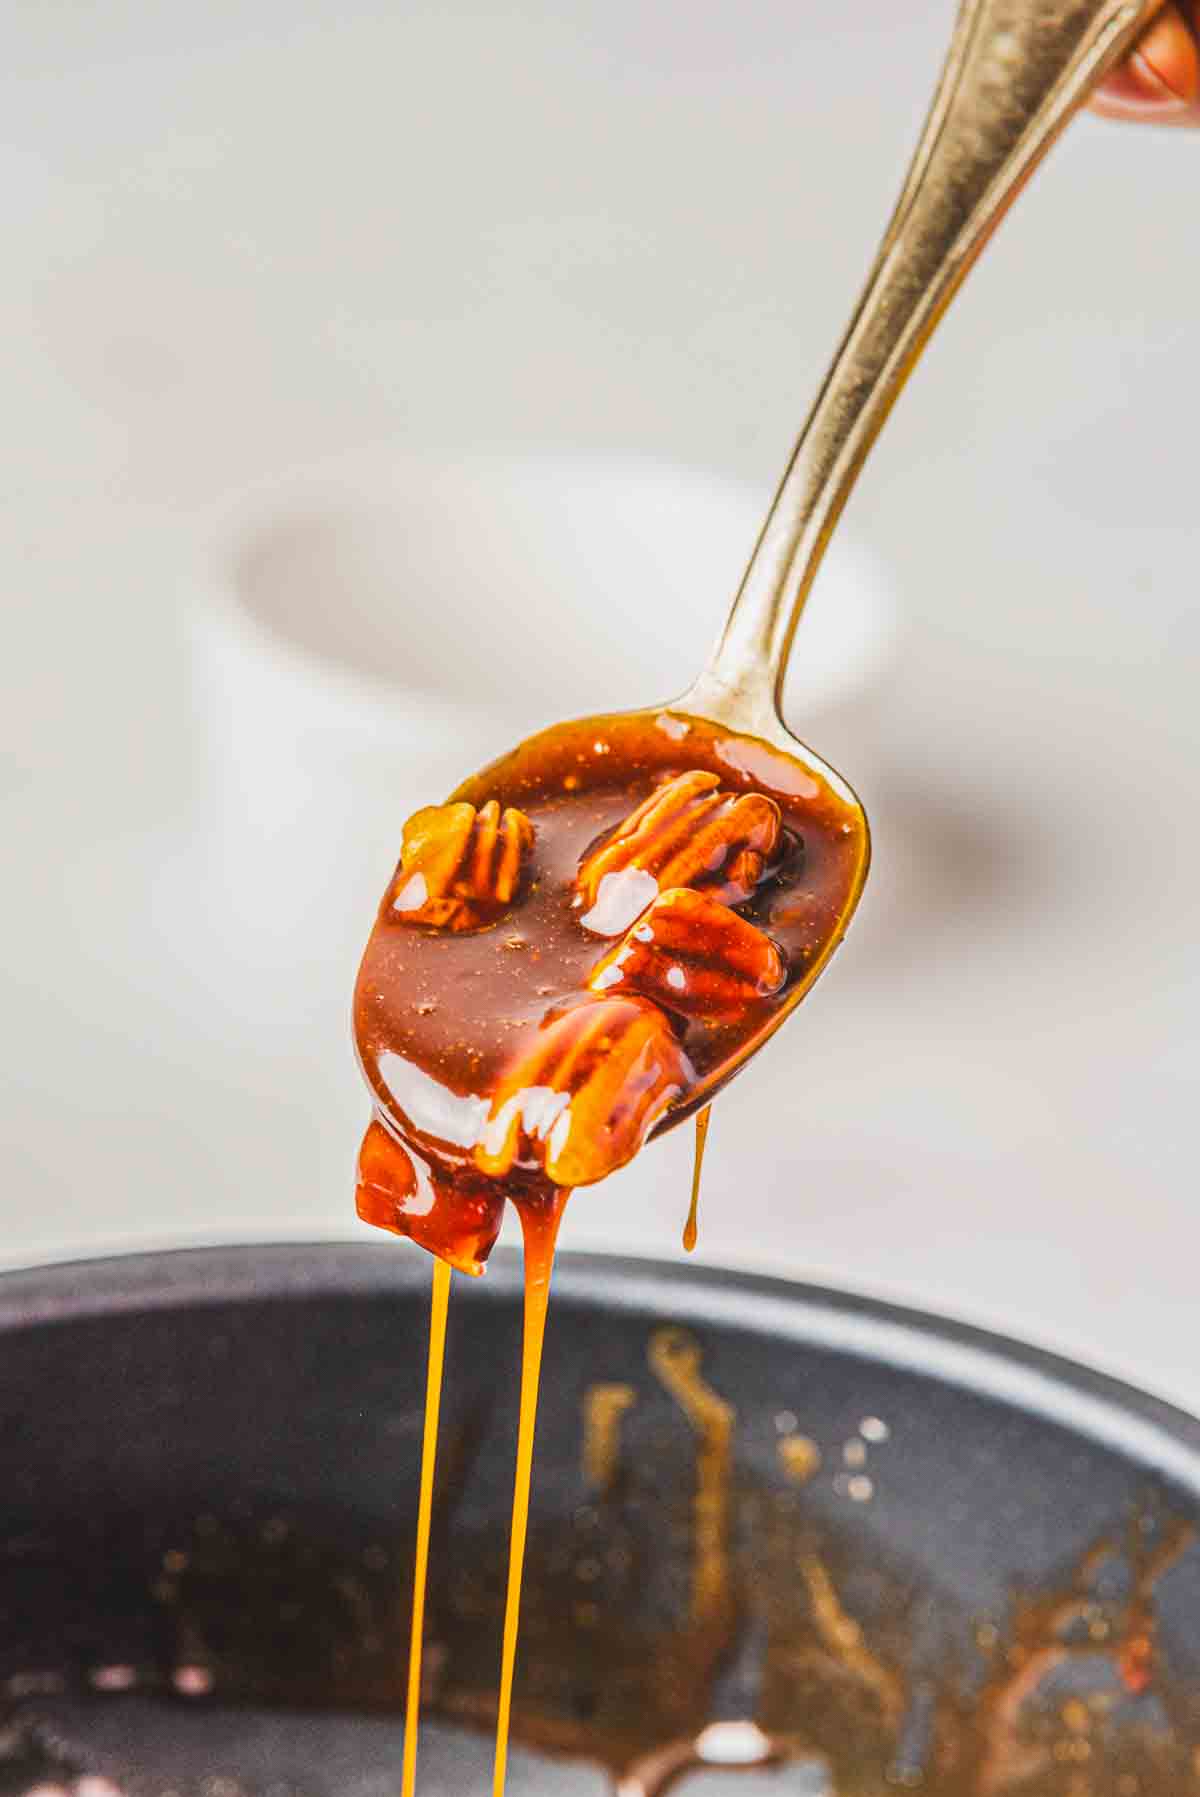 A spoon full of finished caramel pecan sauce for the burnt Basque cheesecake.